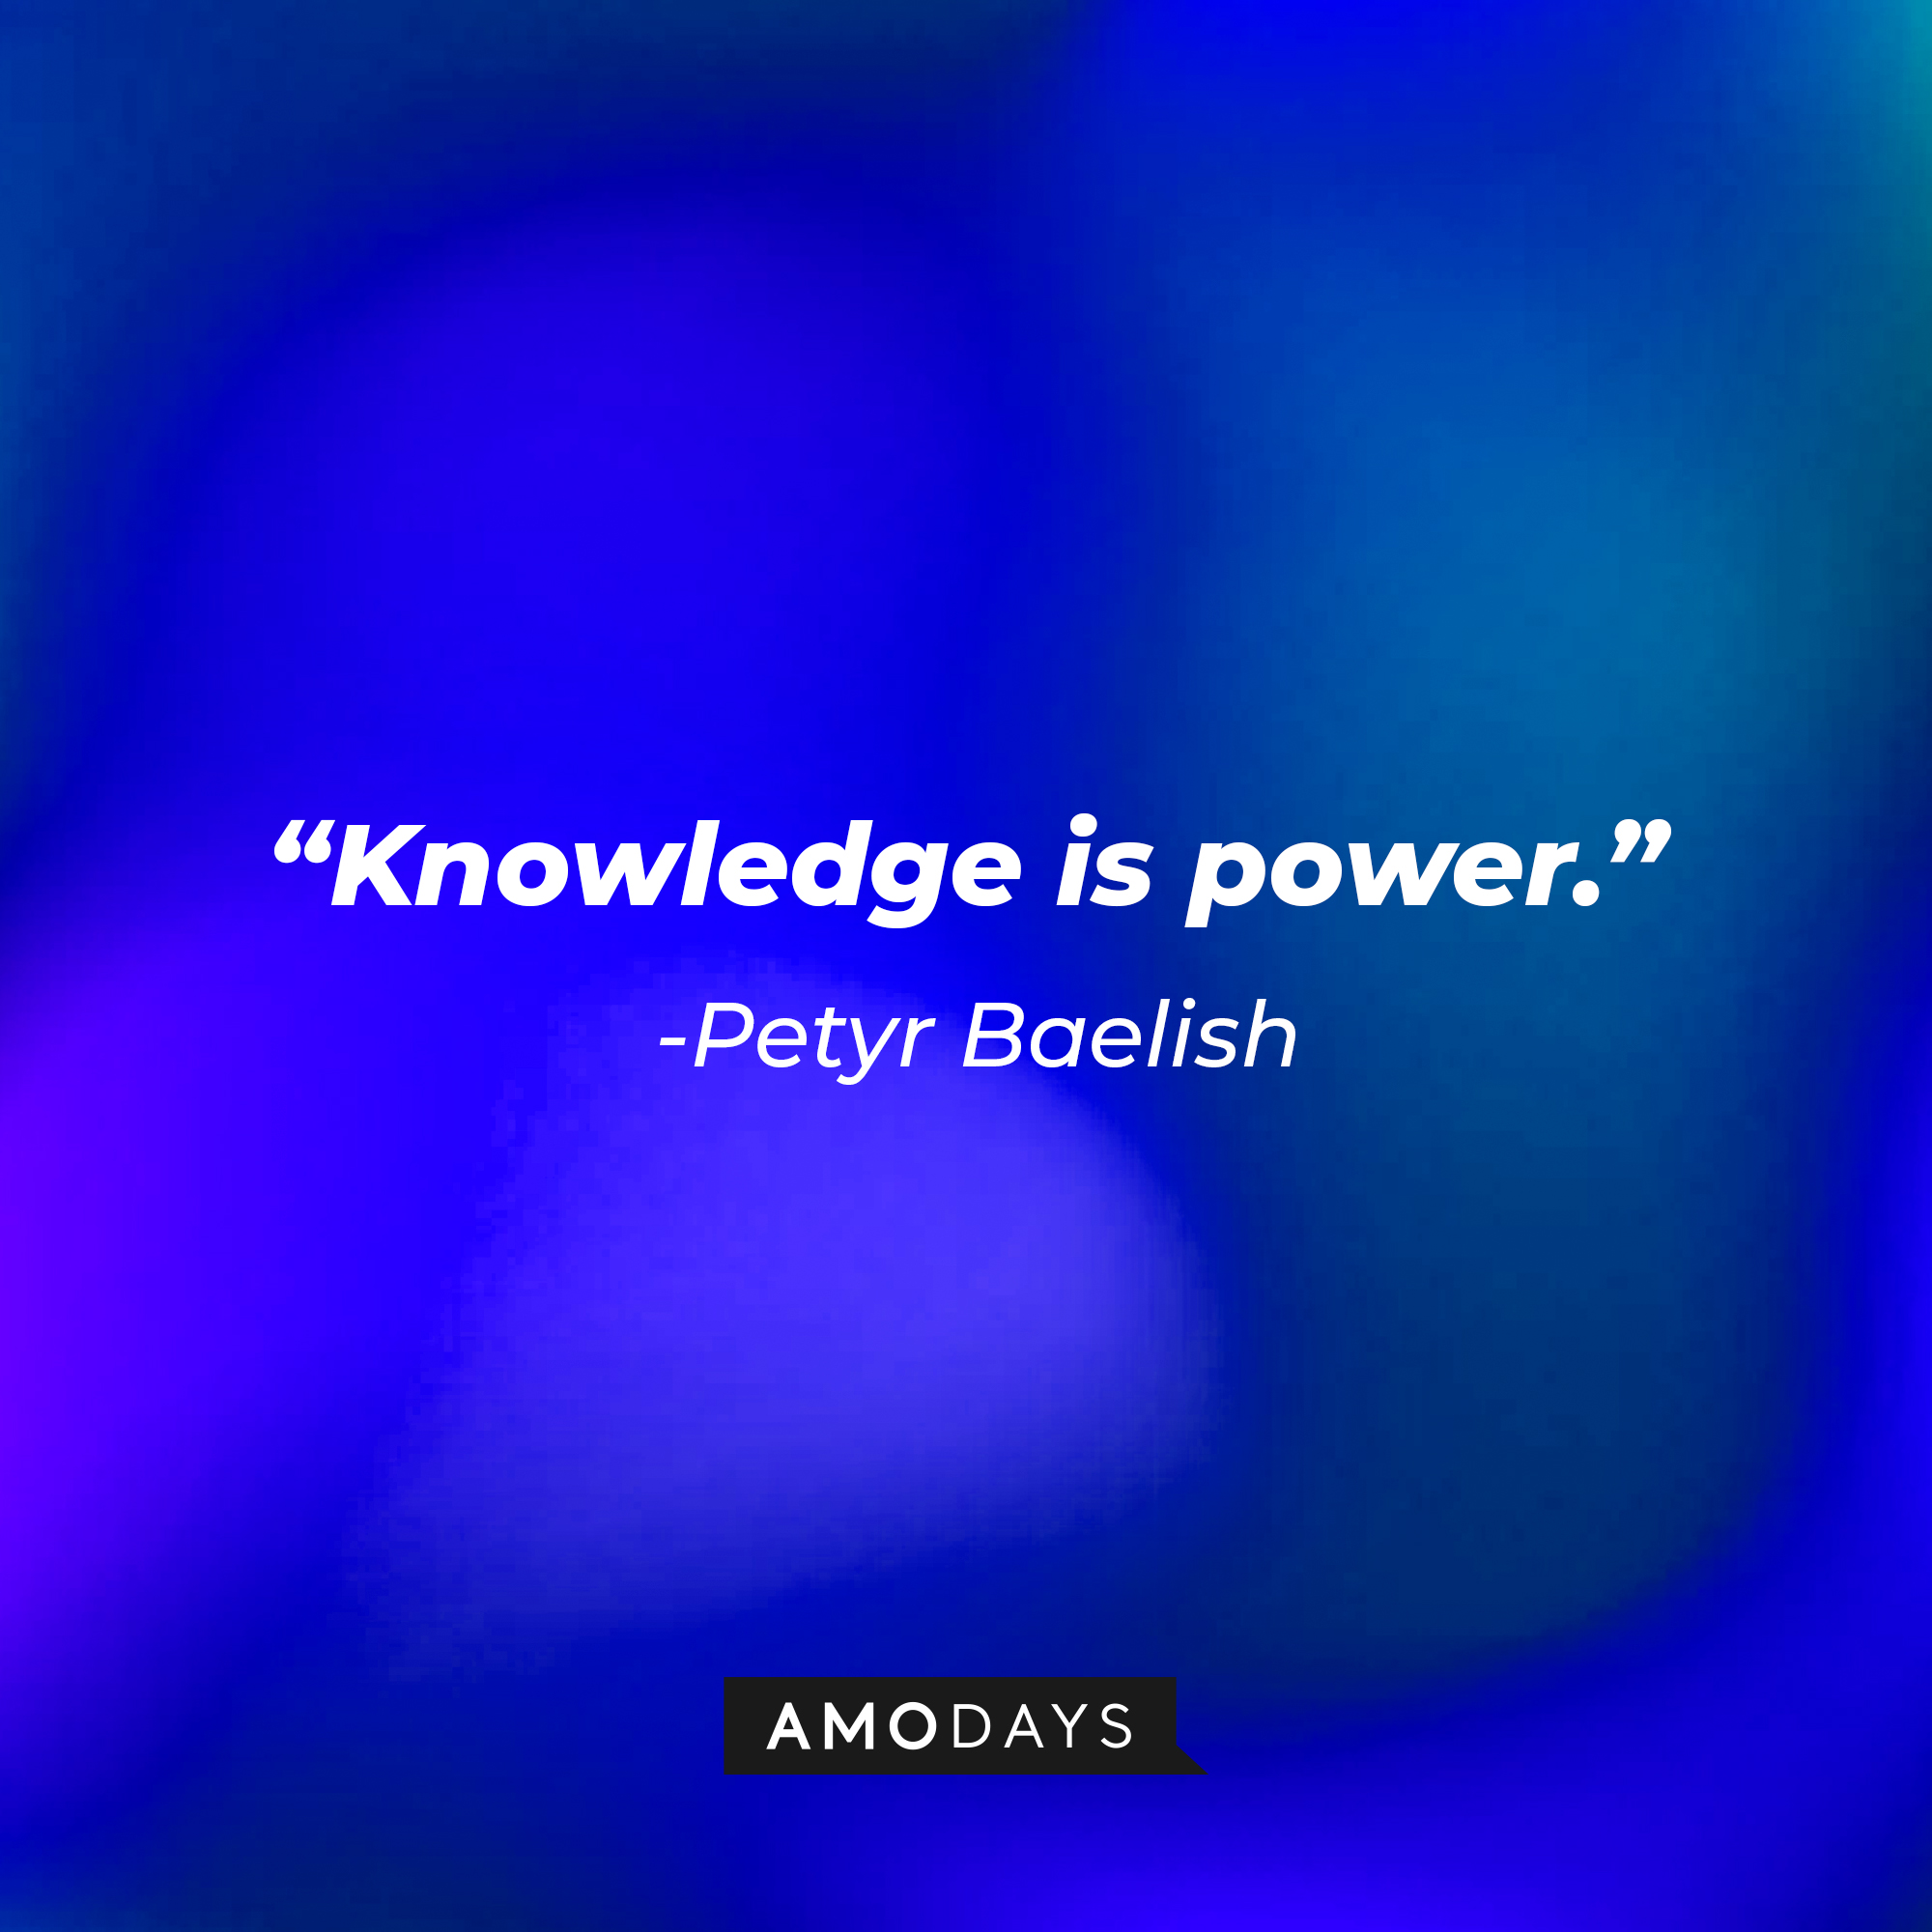 Petyr Baelish’s quote: “Knowledge is power.” | Source: AmoDays